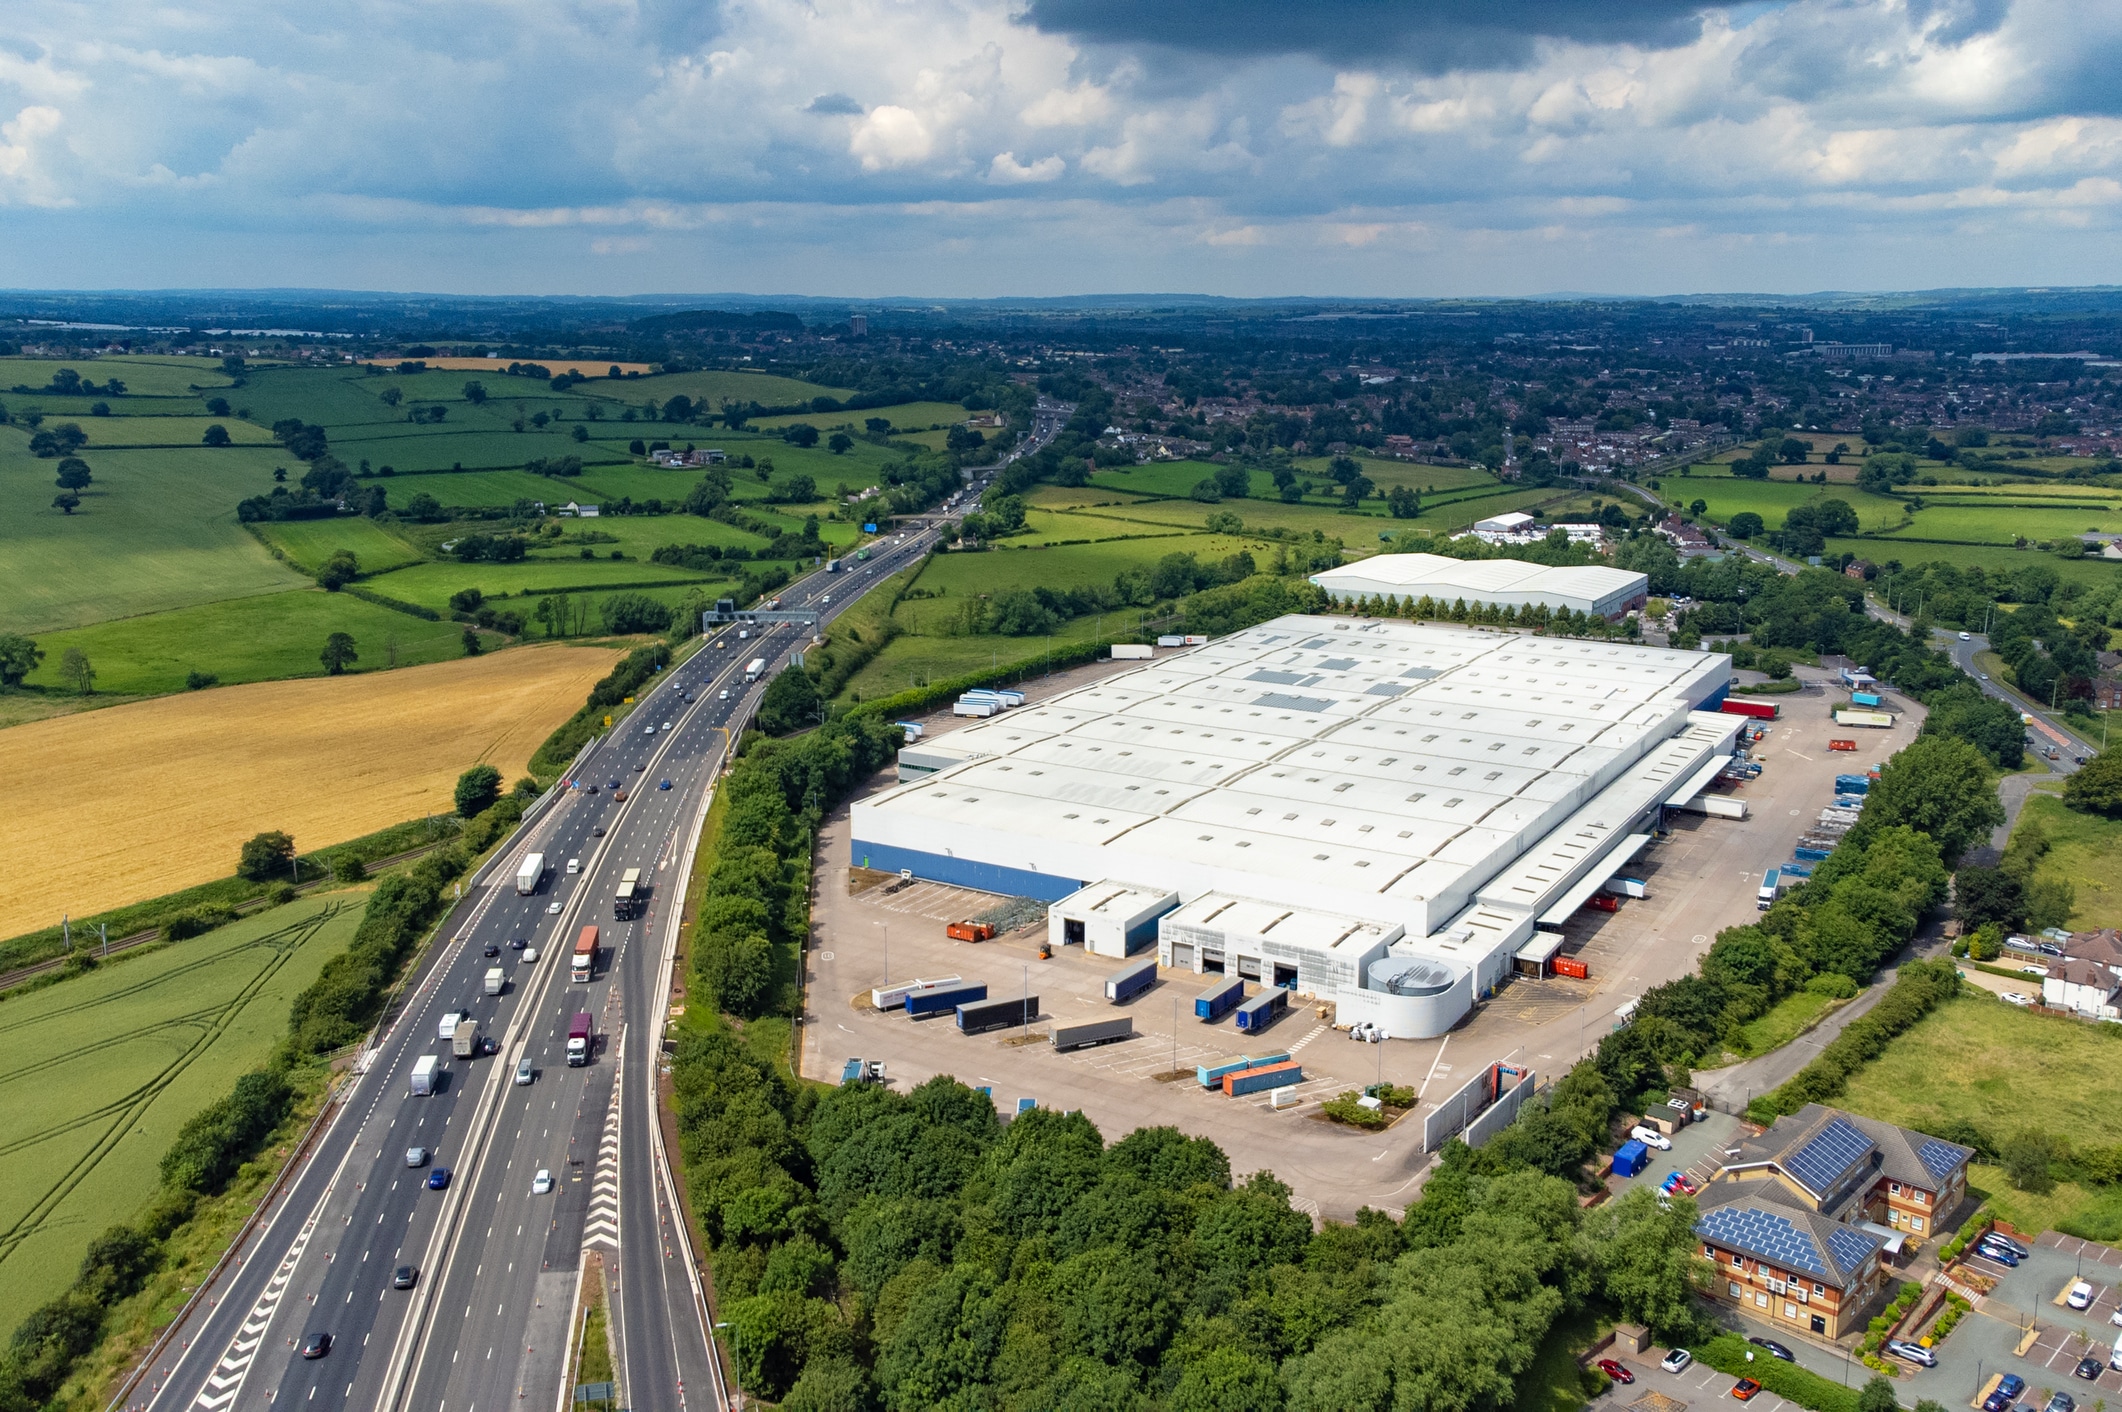 Wide angle aerial view of a large warehouse distribution centre next to the M6 motorway in the West Midlands, England, UK.